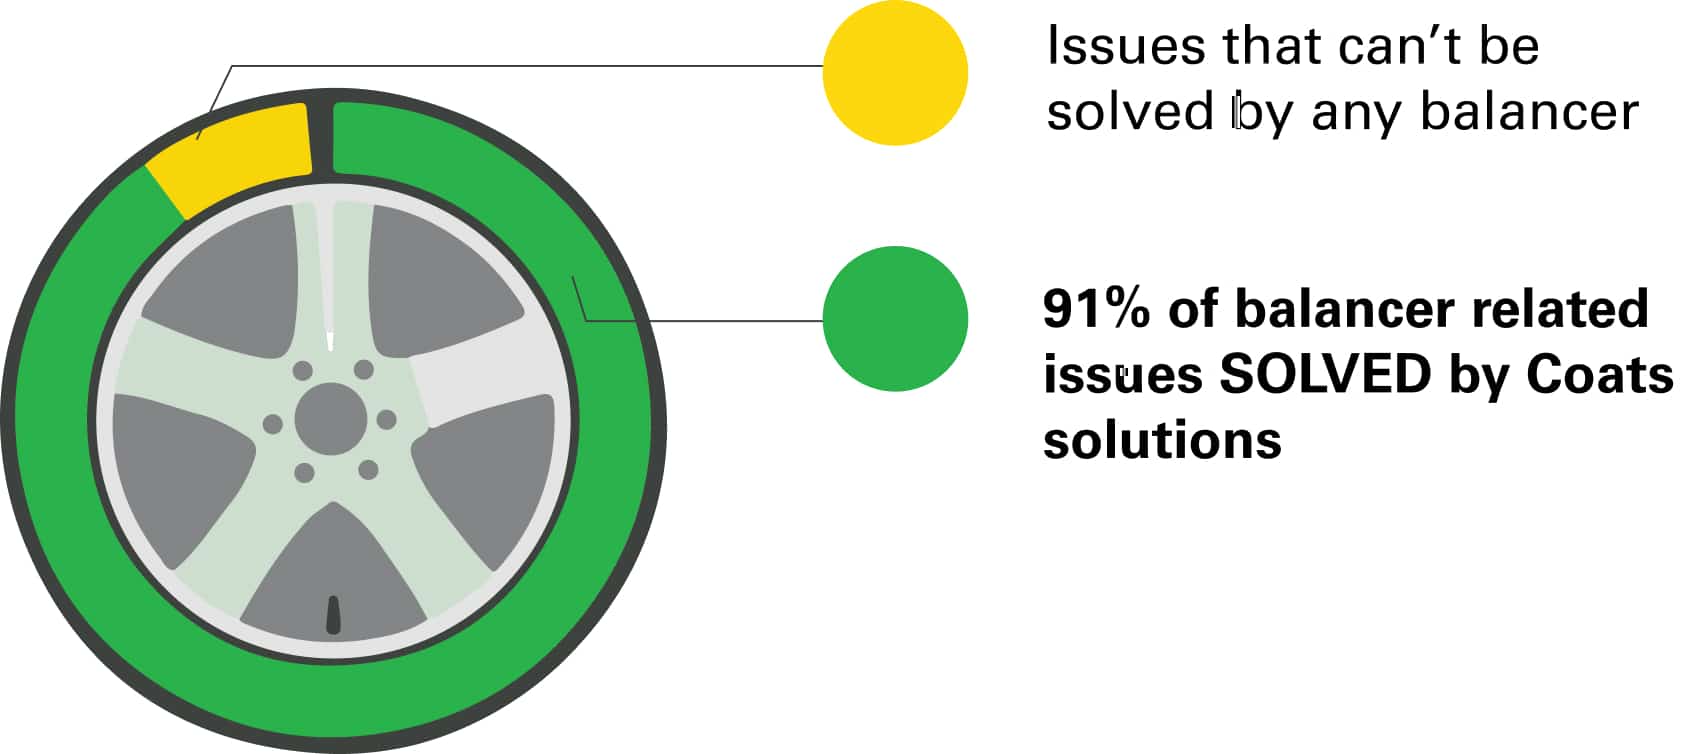 An illustration of a pie chart has a small sliver that says “issues that can’t be solved by any balancer,” and a much larger sliver that says “91% of balancer related issues solved by Coats solutions.